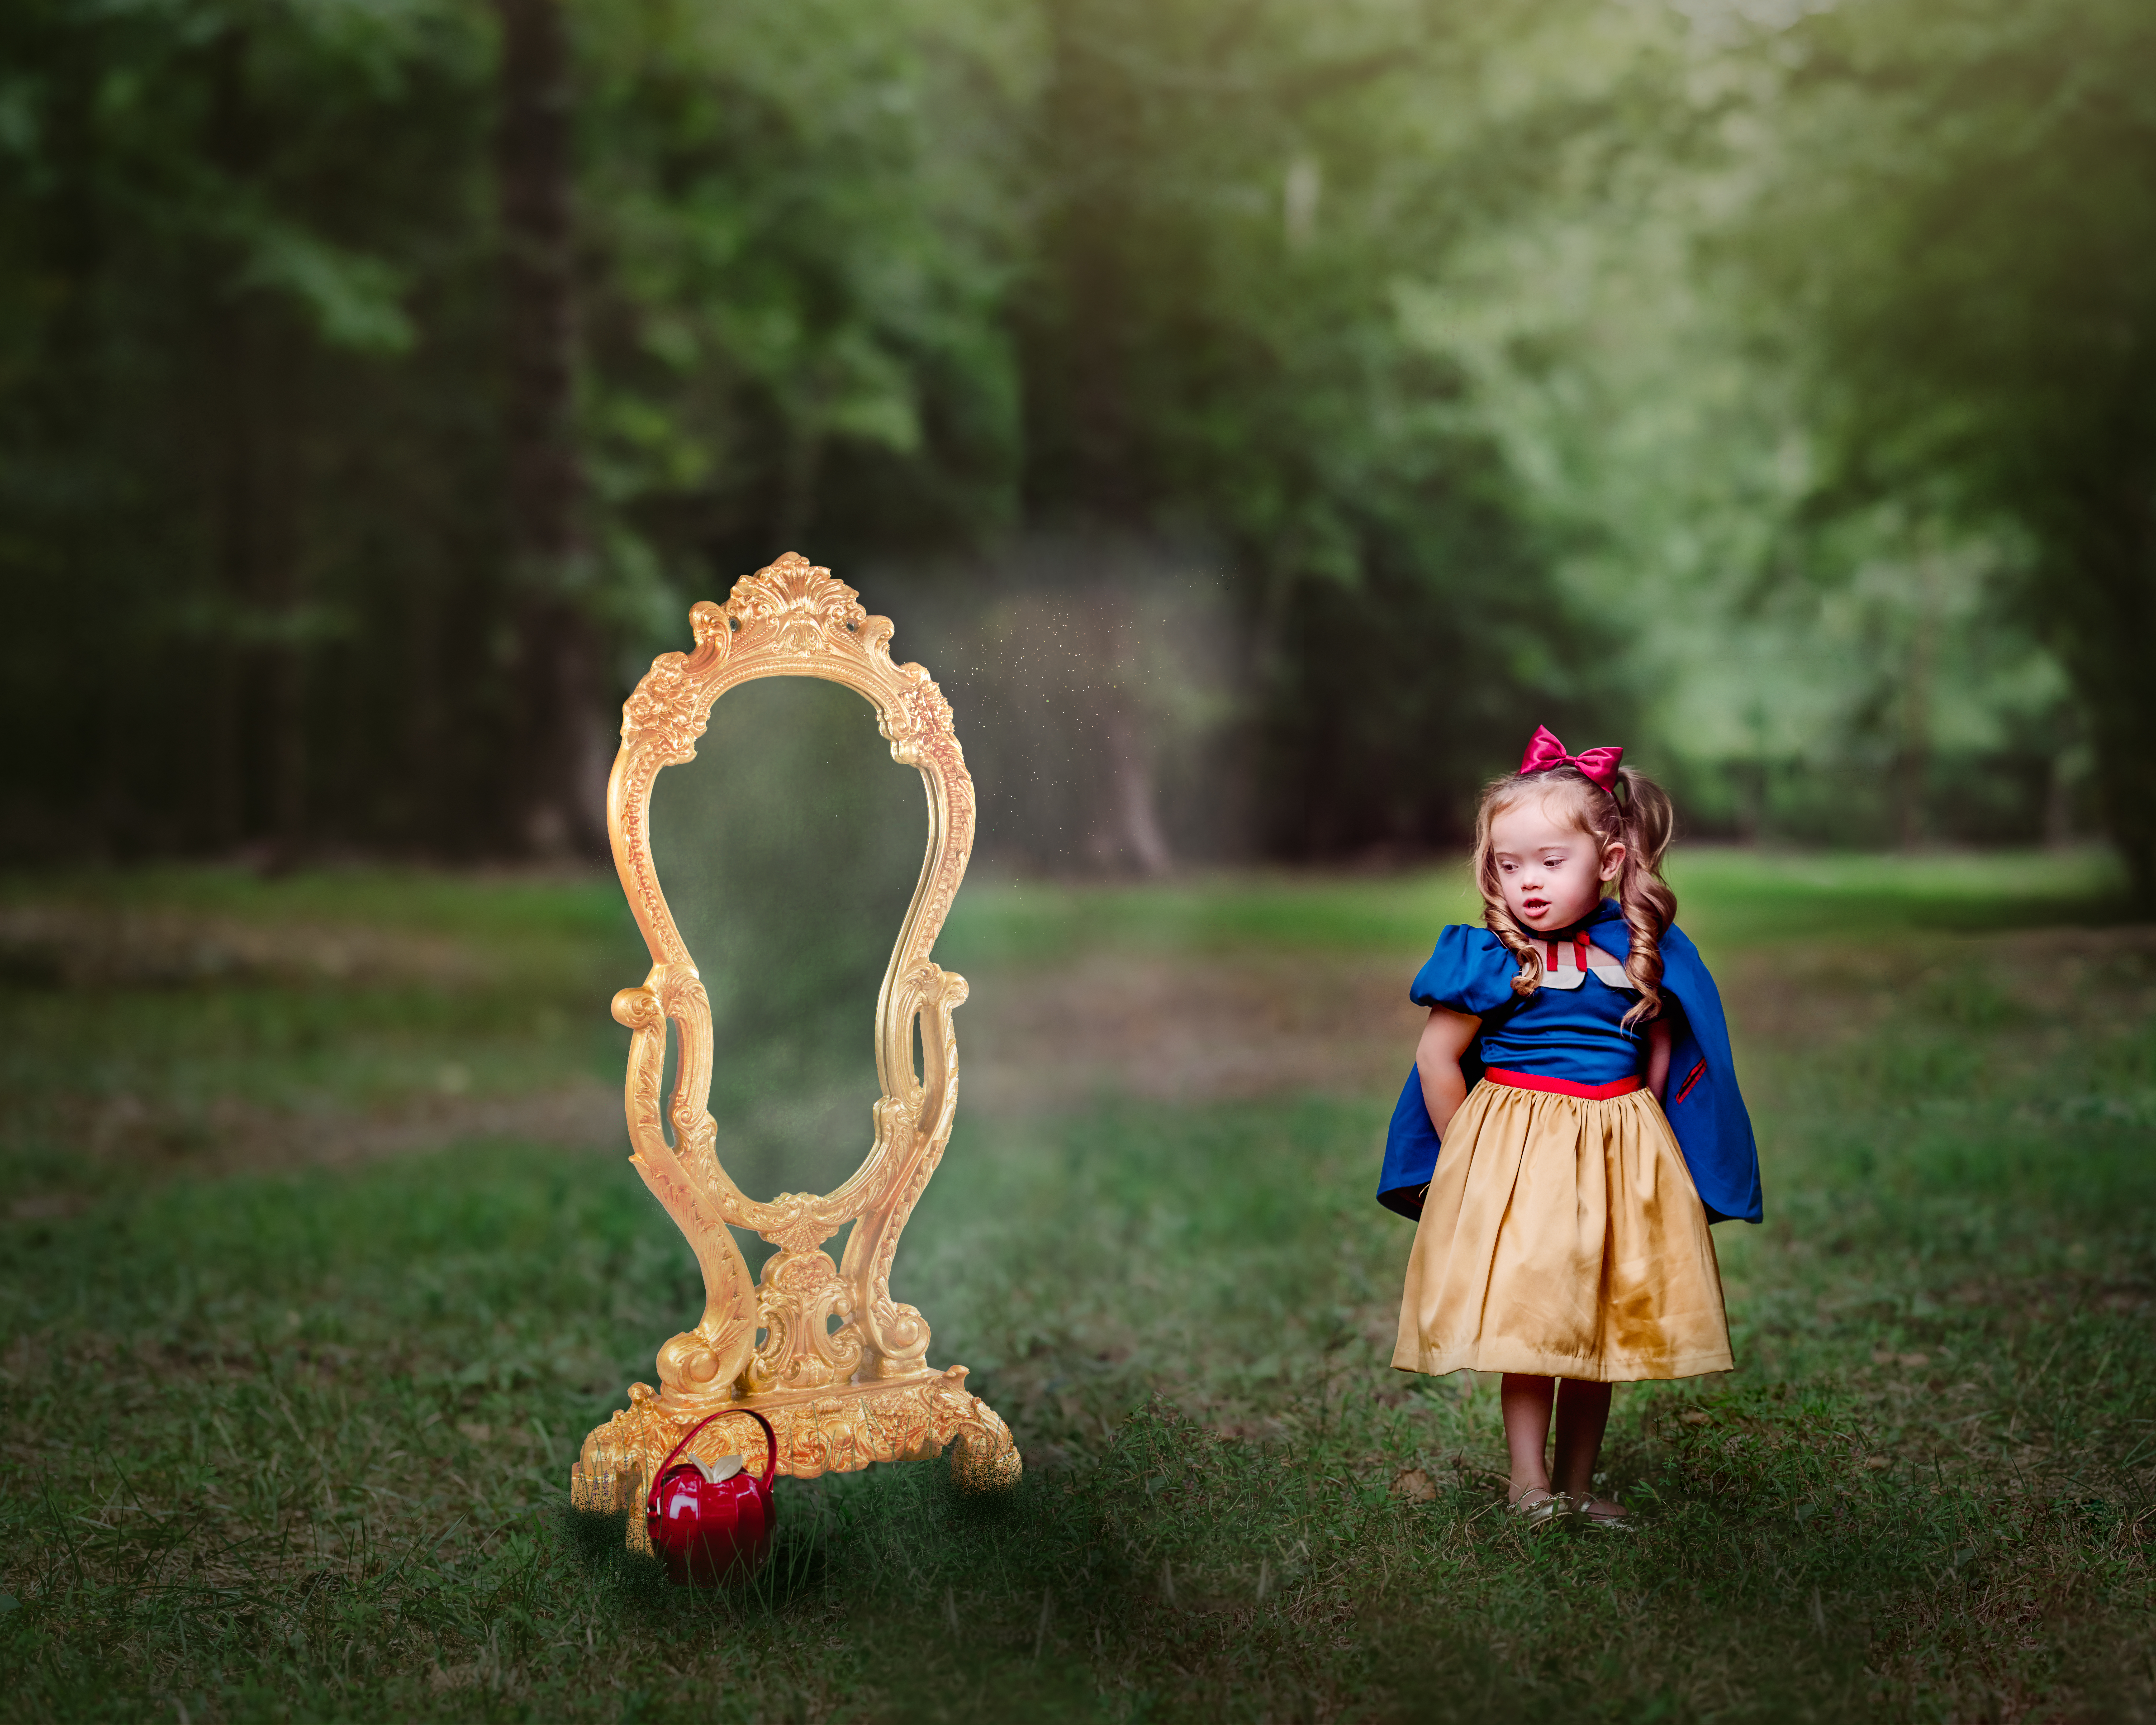 a little girl with down syndrome plays dress up as snow white with a magic mirror